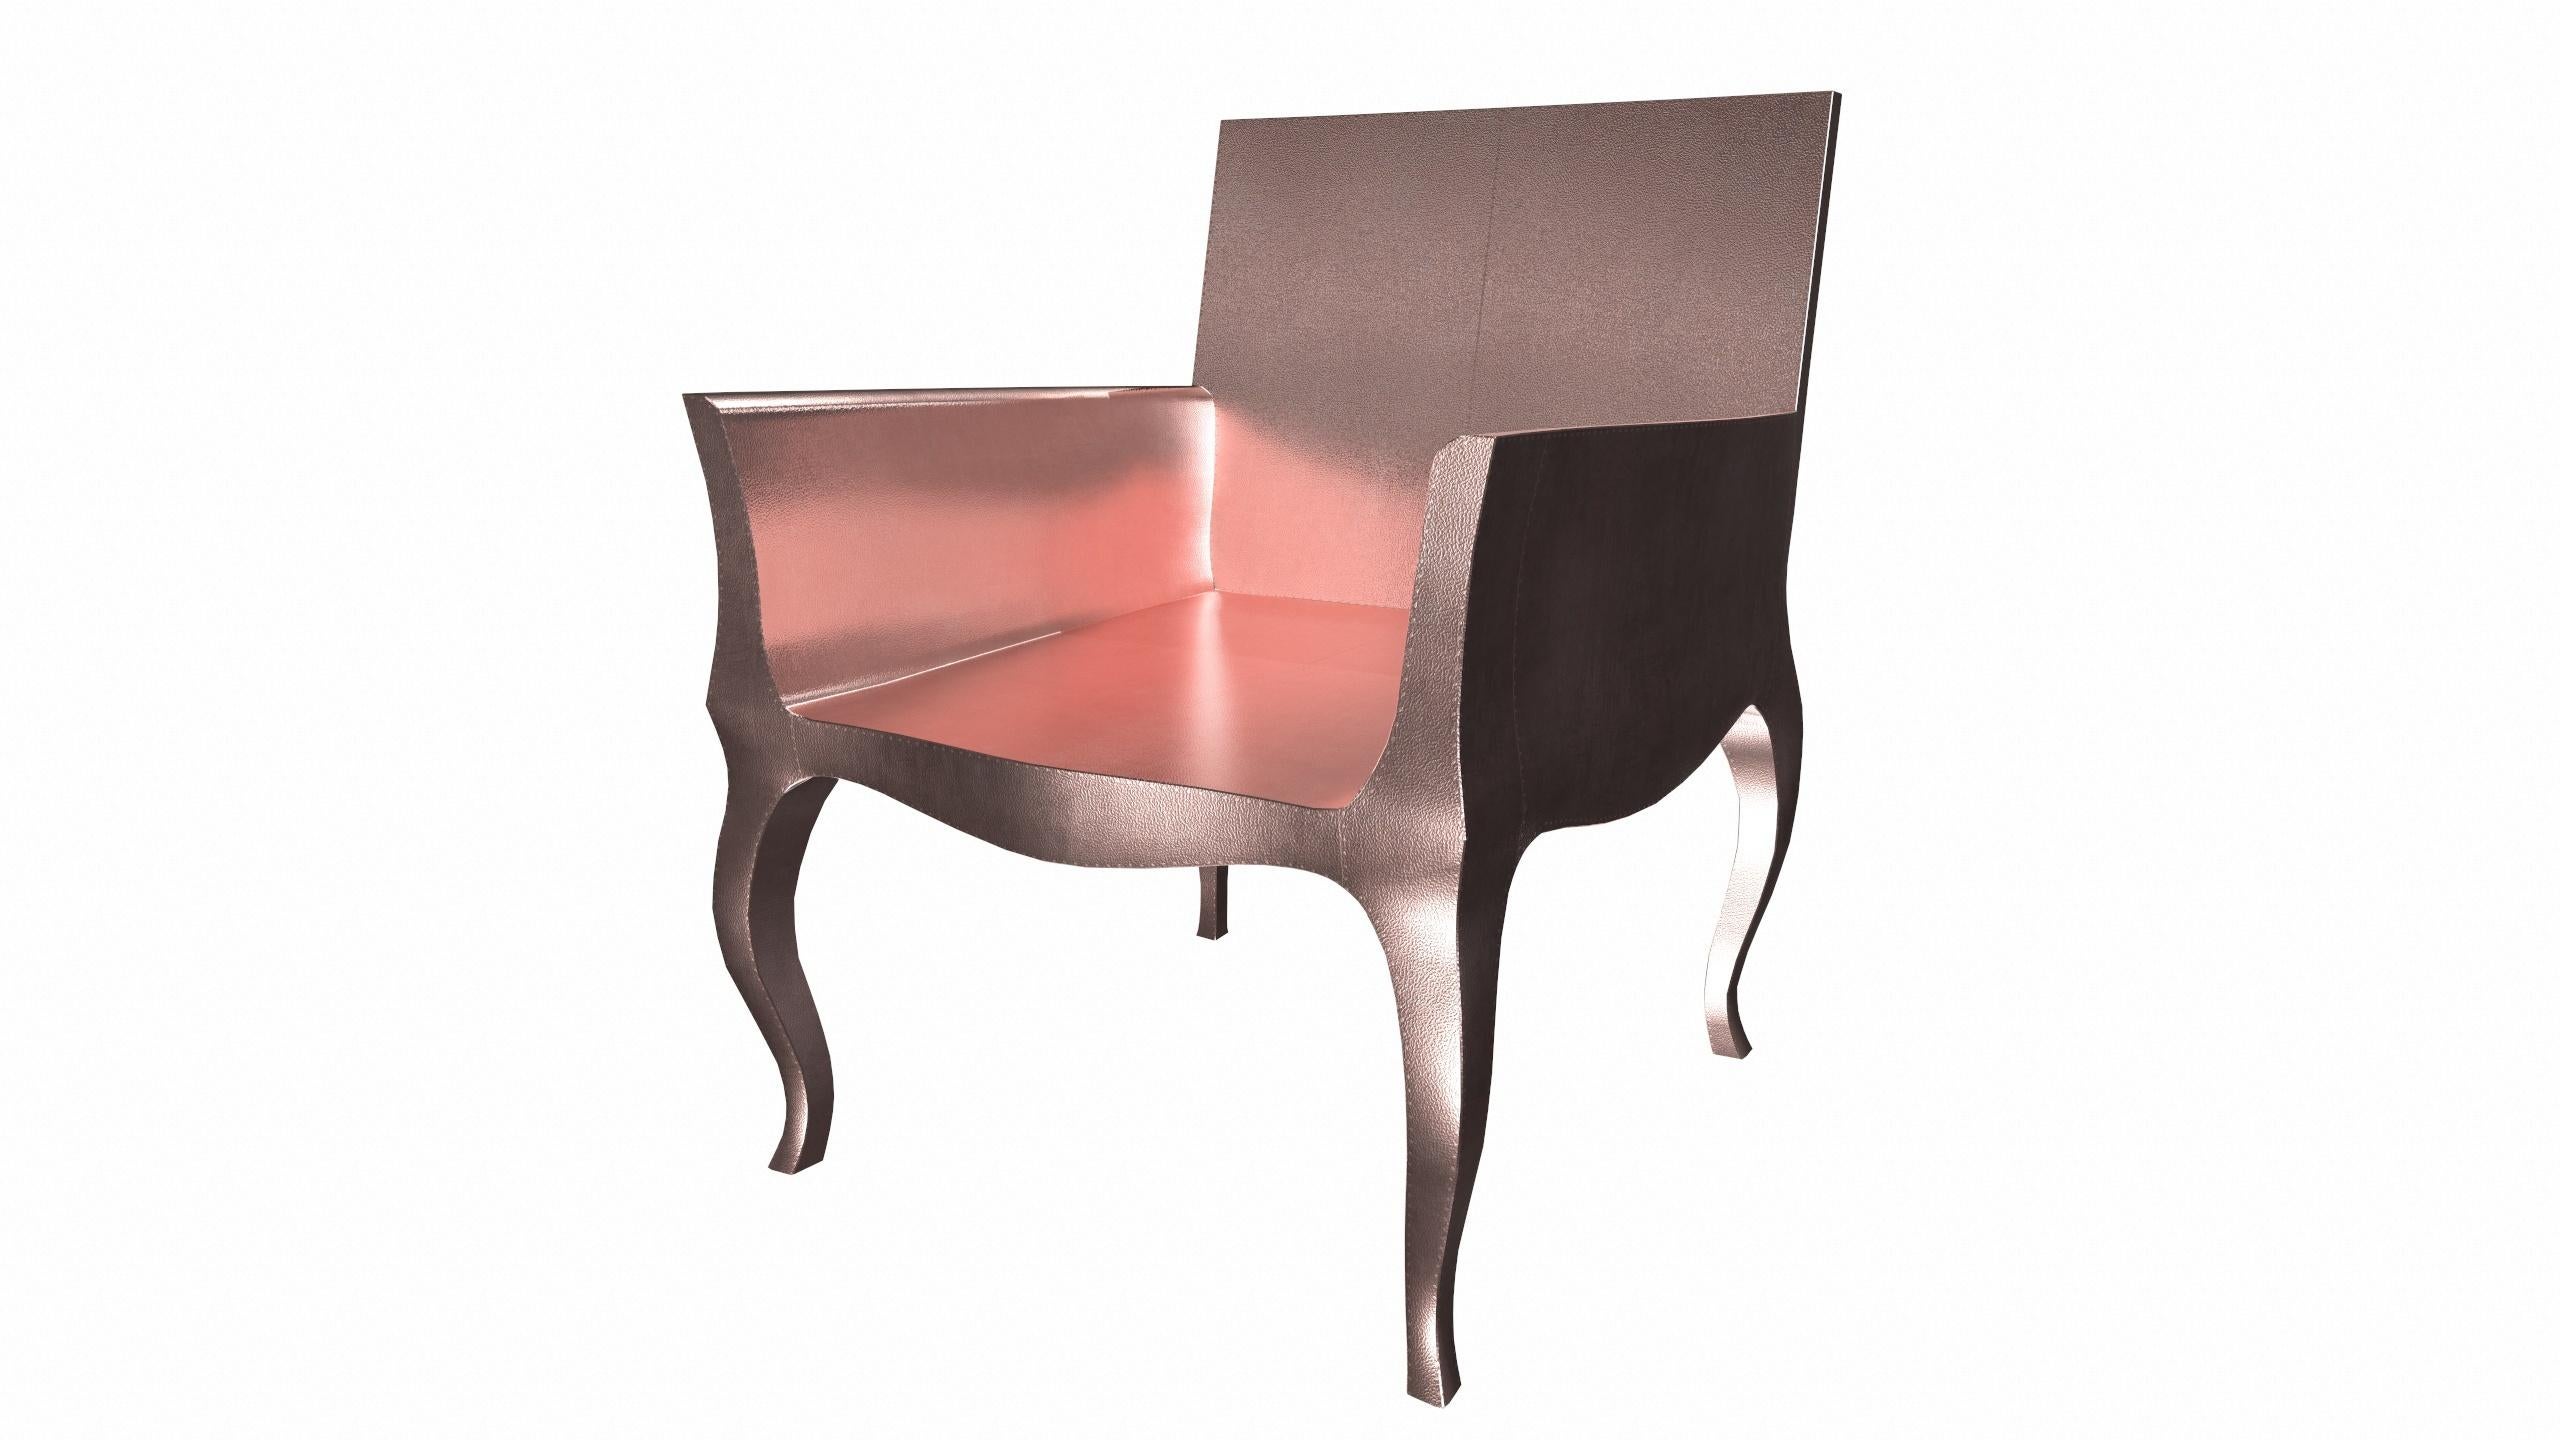 Indian Art Deco Chairs Fine Hammered in Copper by Paul Mathieu For Sale